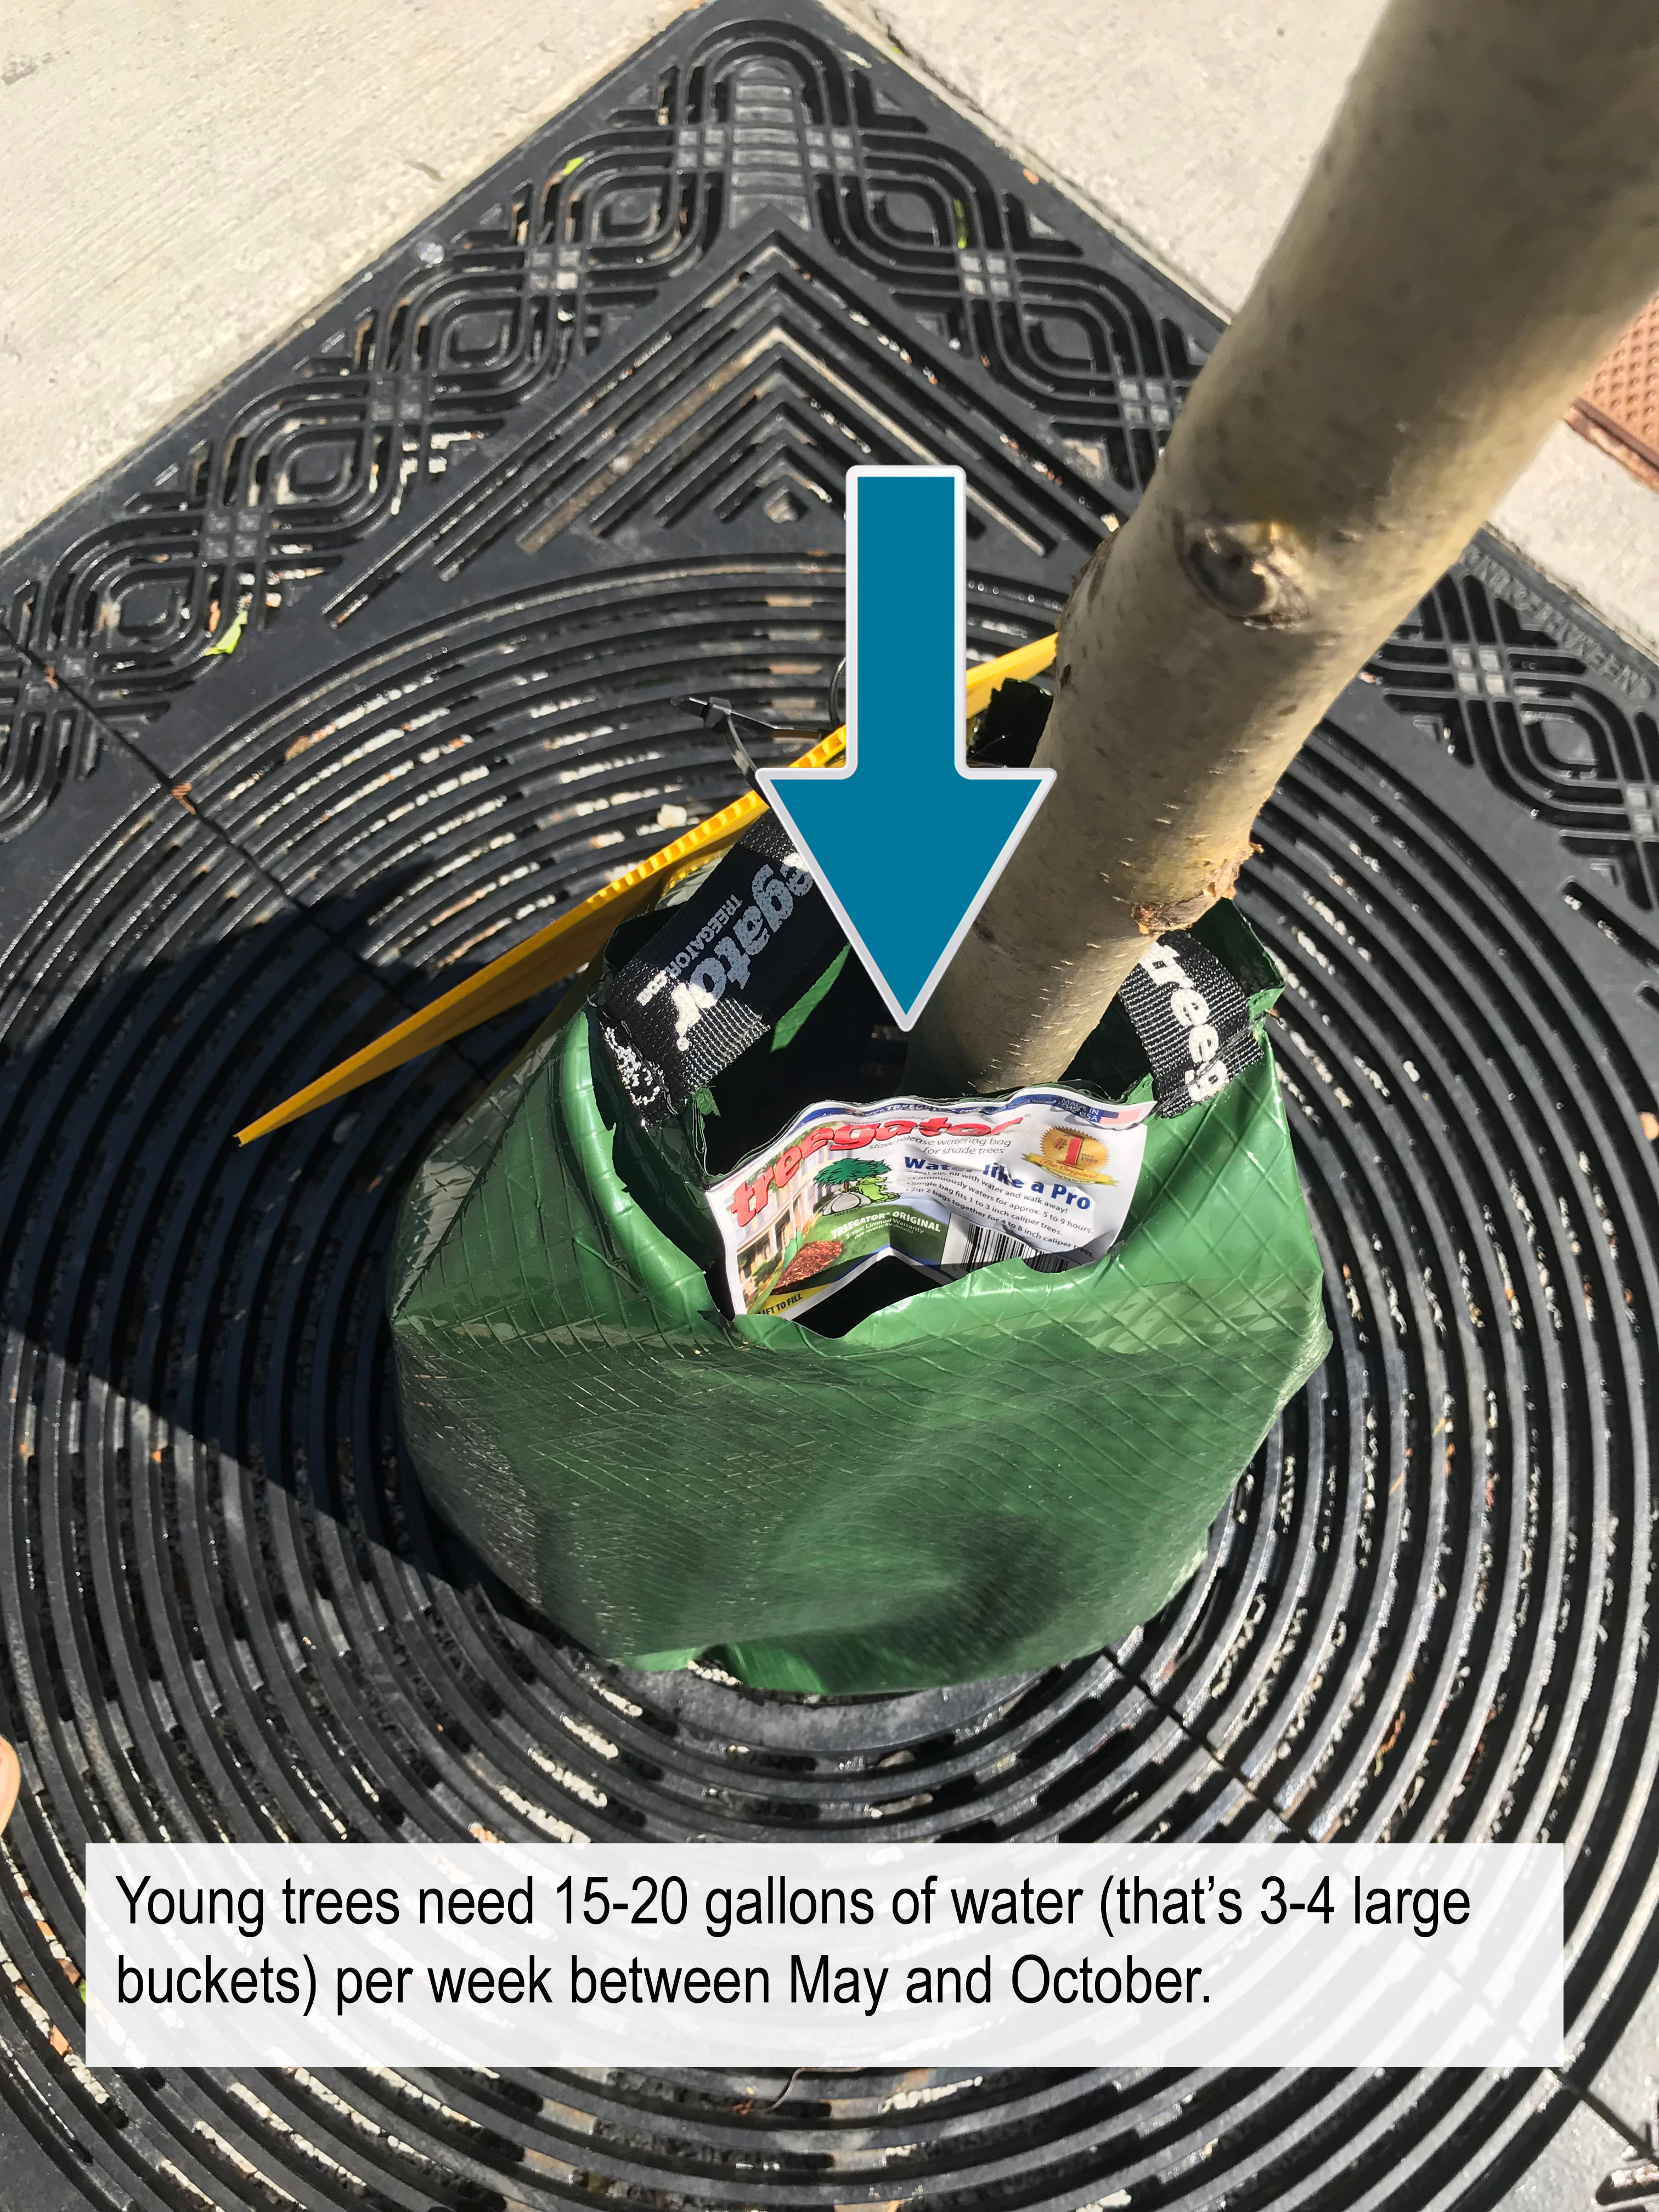 Young trees need 15-20 gallons (3-4 large buckets) per week between May and October